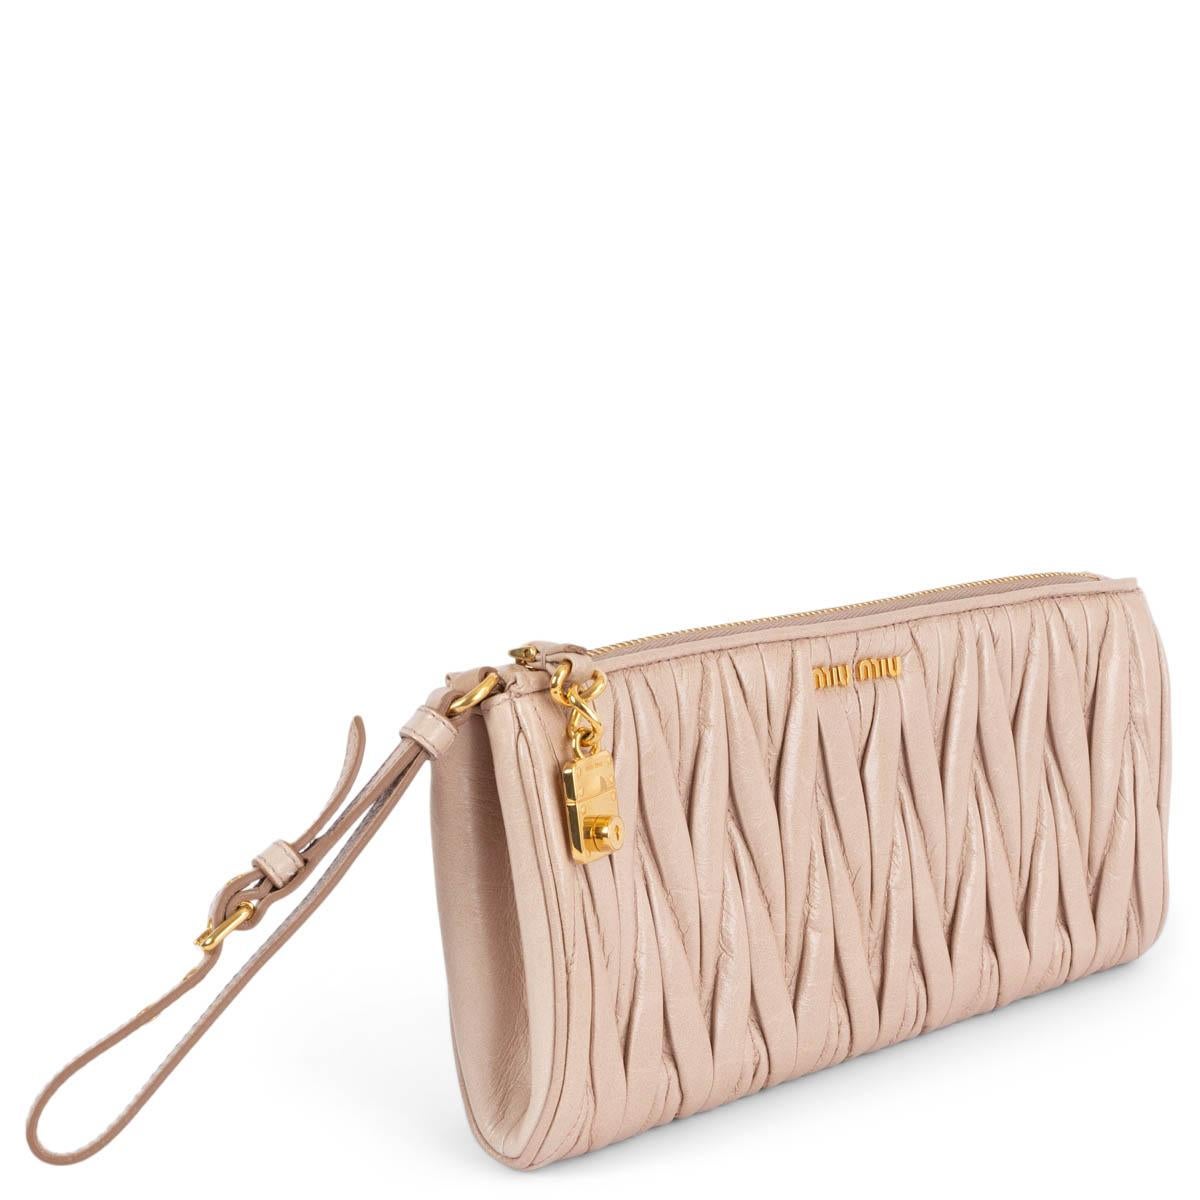 100% authentic Miu Miu Matelassé clutch in nude smootch calfskin featuring gold-tone hardware. Lined in champagne colored satin with one open pocket against the back.  Has been carried and is in excellent condition. 

Measurements
Height	13cm